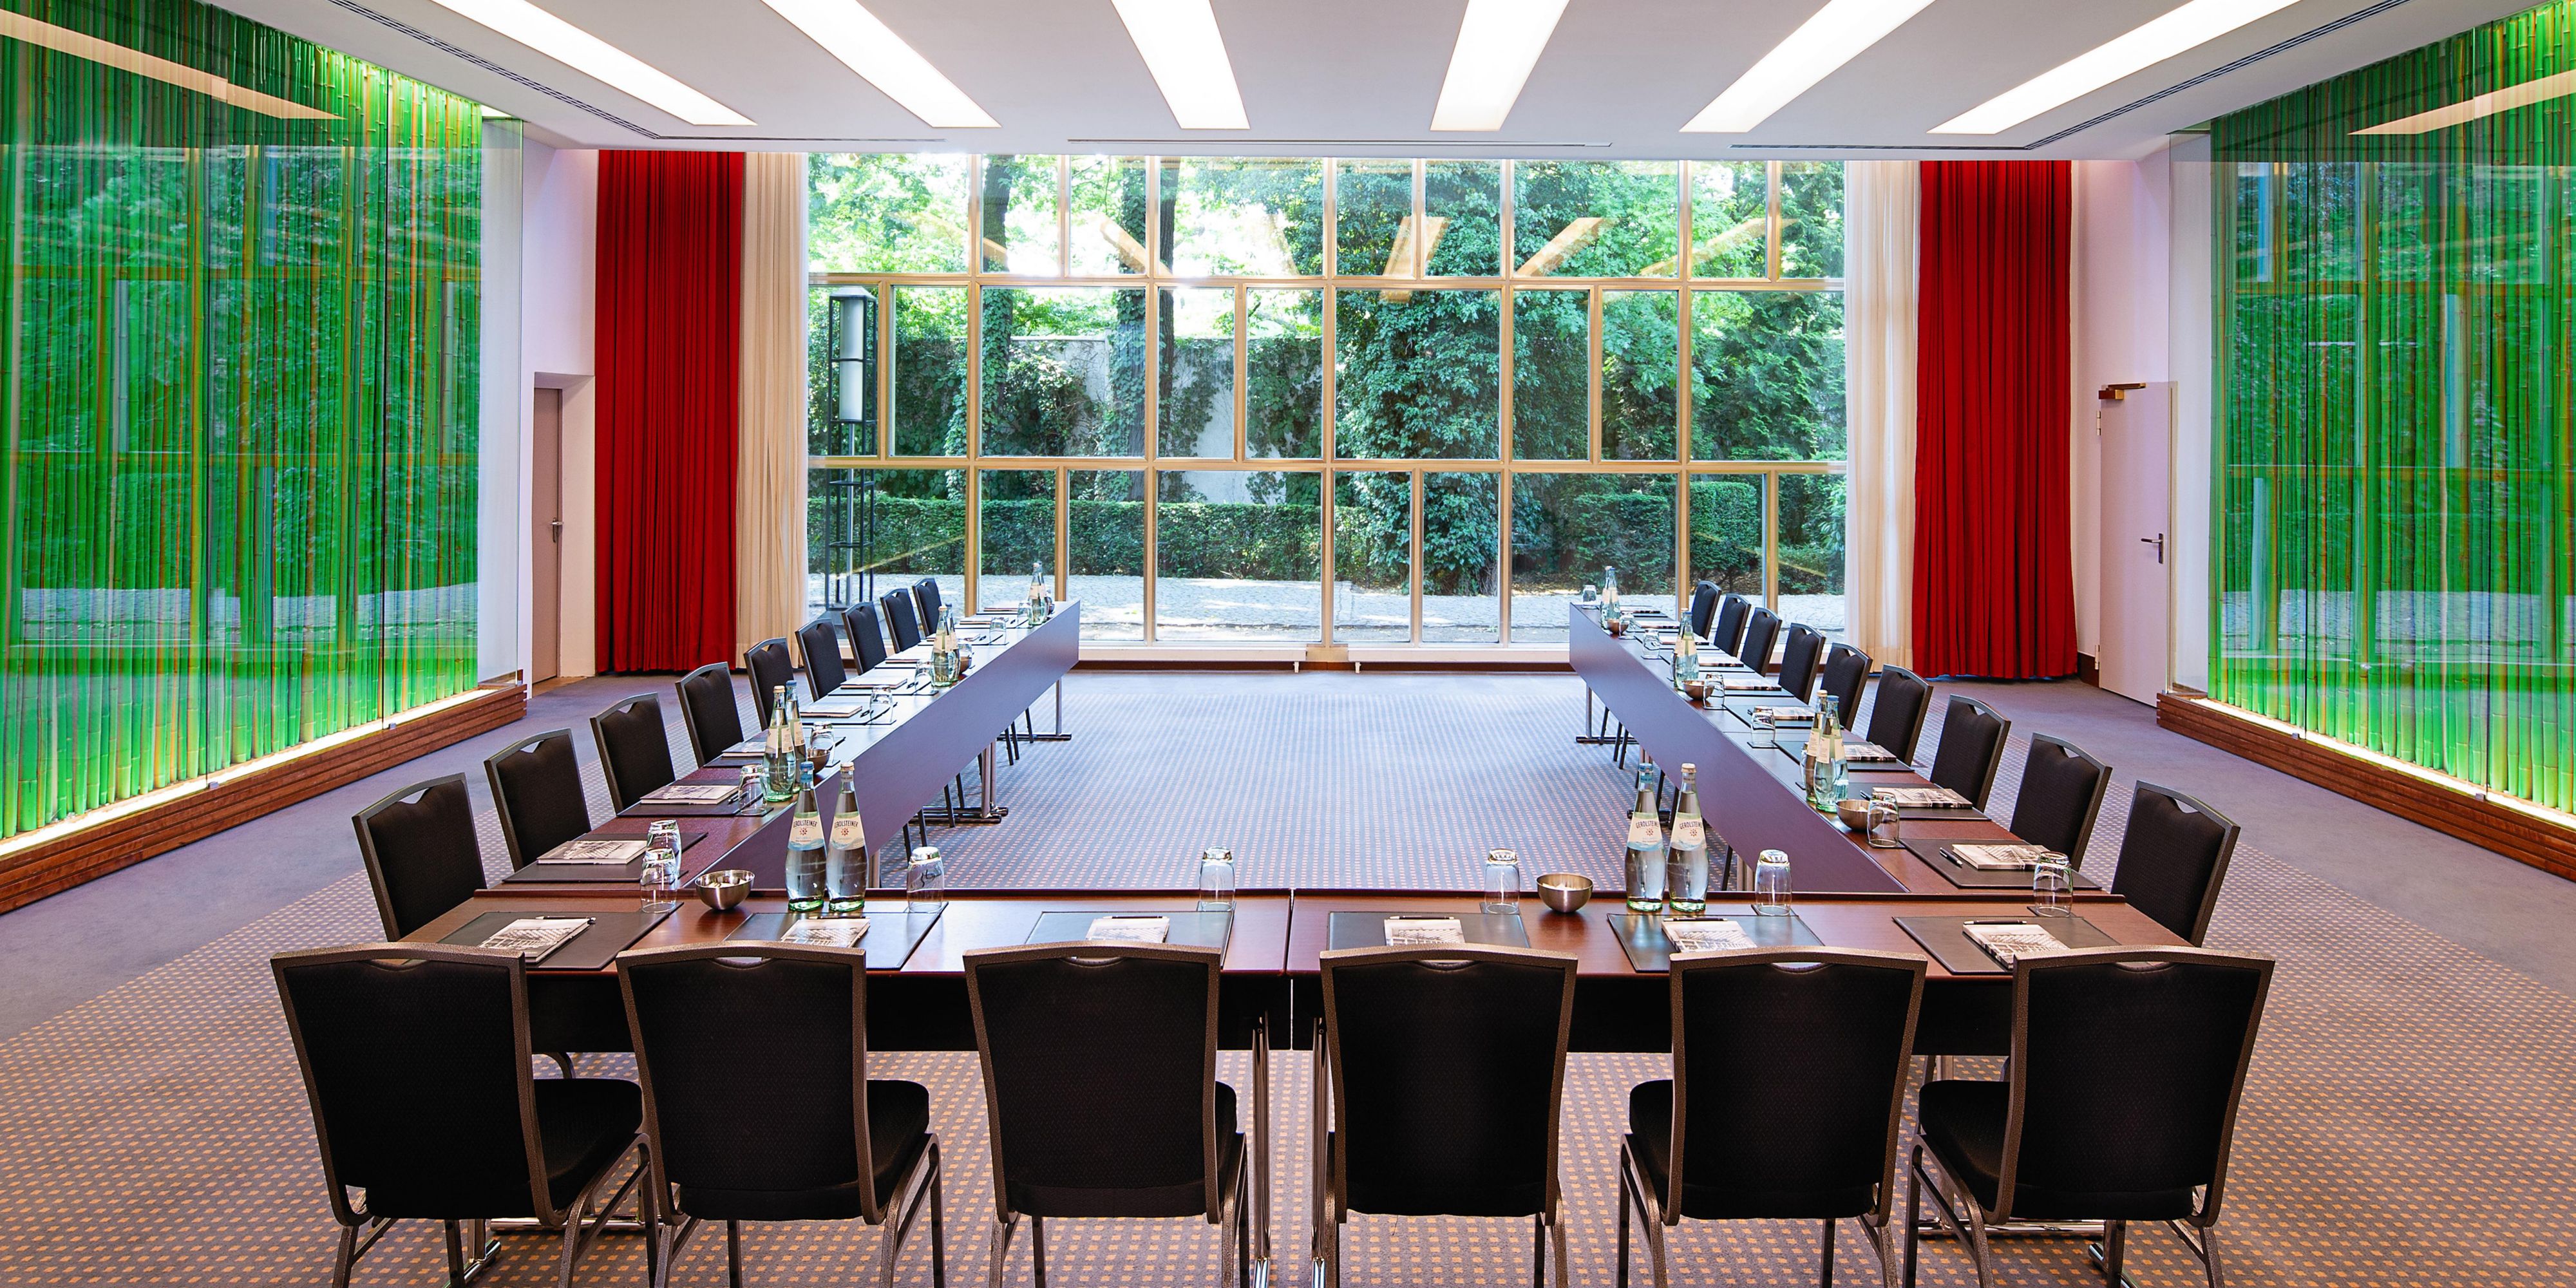 As one of the largest conference hotels in Europe, located directly at the Tiergarten in Berlin, the InterContinental Berlin offers the ideal setting for your event with 55 event rooms and 6,200 m2 of event space. With state-of-the-art technologies and a highly experienced and professional team, we have a perfect solutions for your requirements.